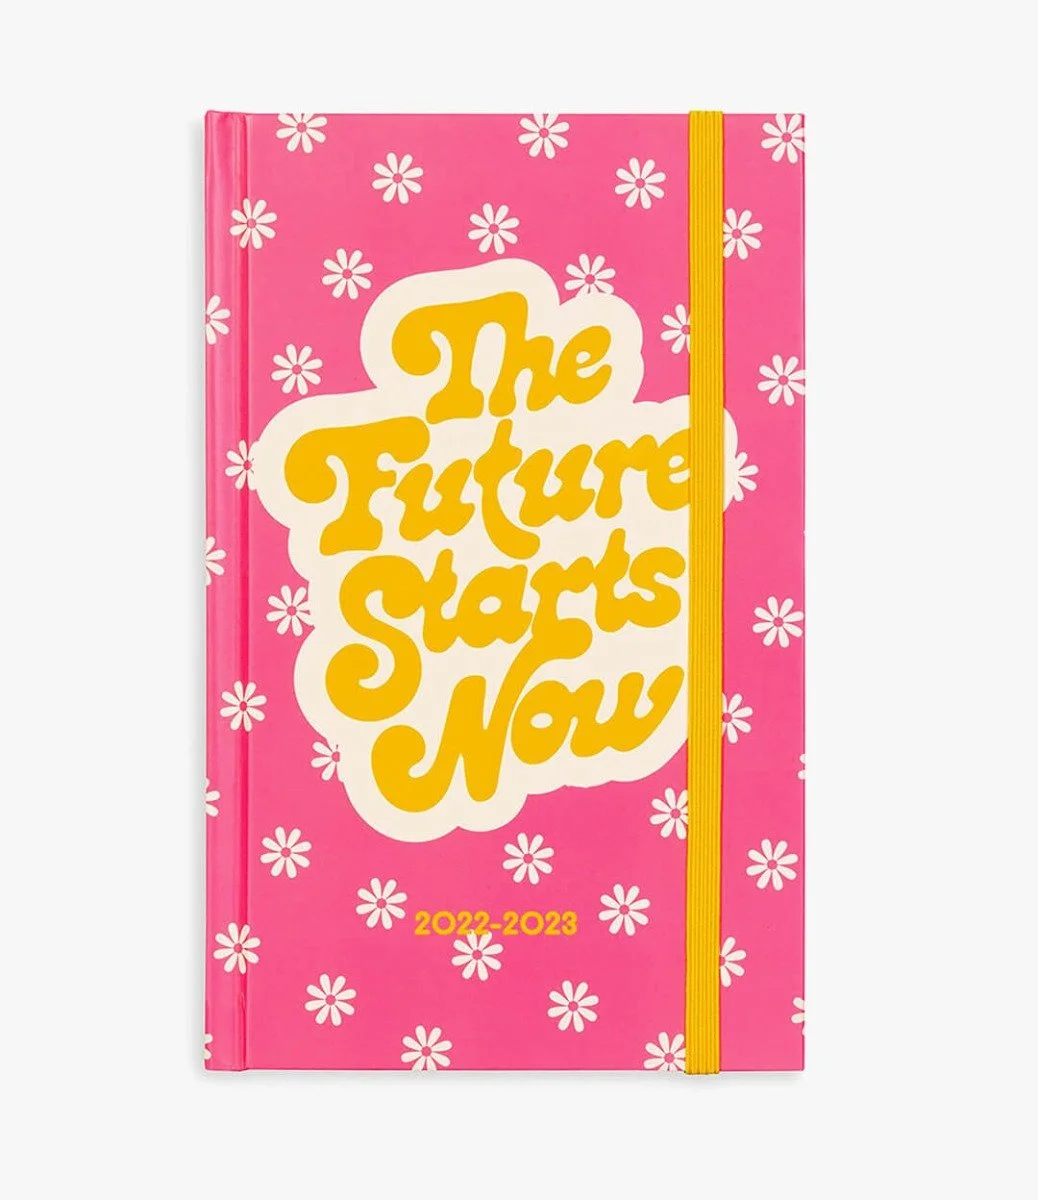 17 Month Classic Planner, The Future Starts Now by Ban.do